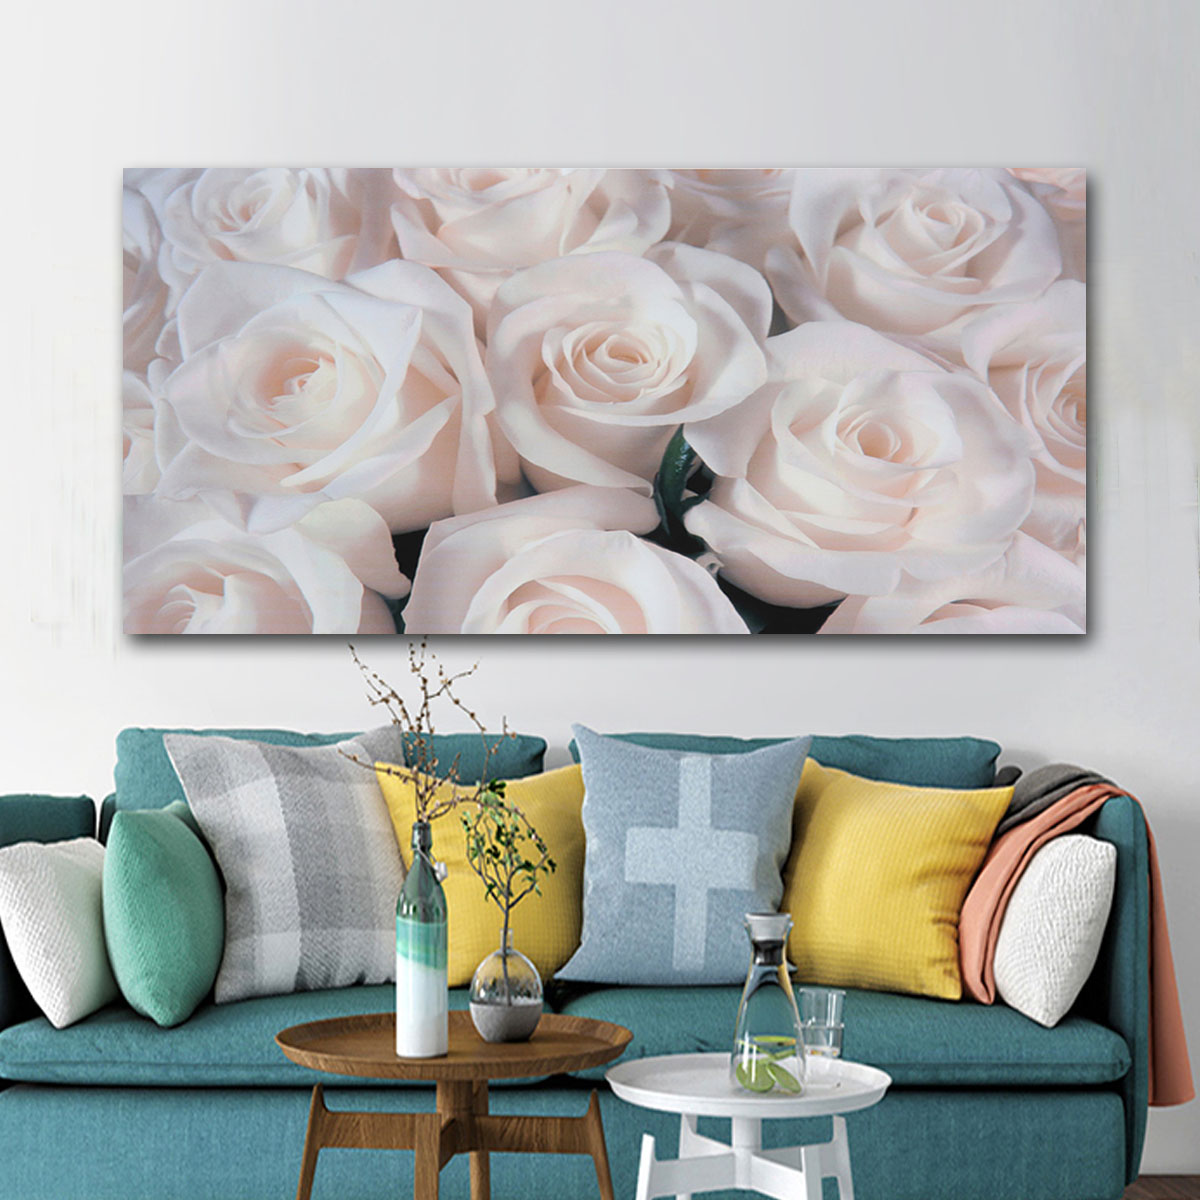 19quotx32quot-Paintings-Roses-Blossom-Flower-Canvas-Prints-Pictures-Art-Home-Decor-Frameless-1407575